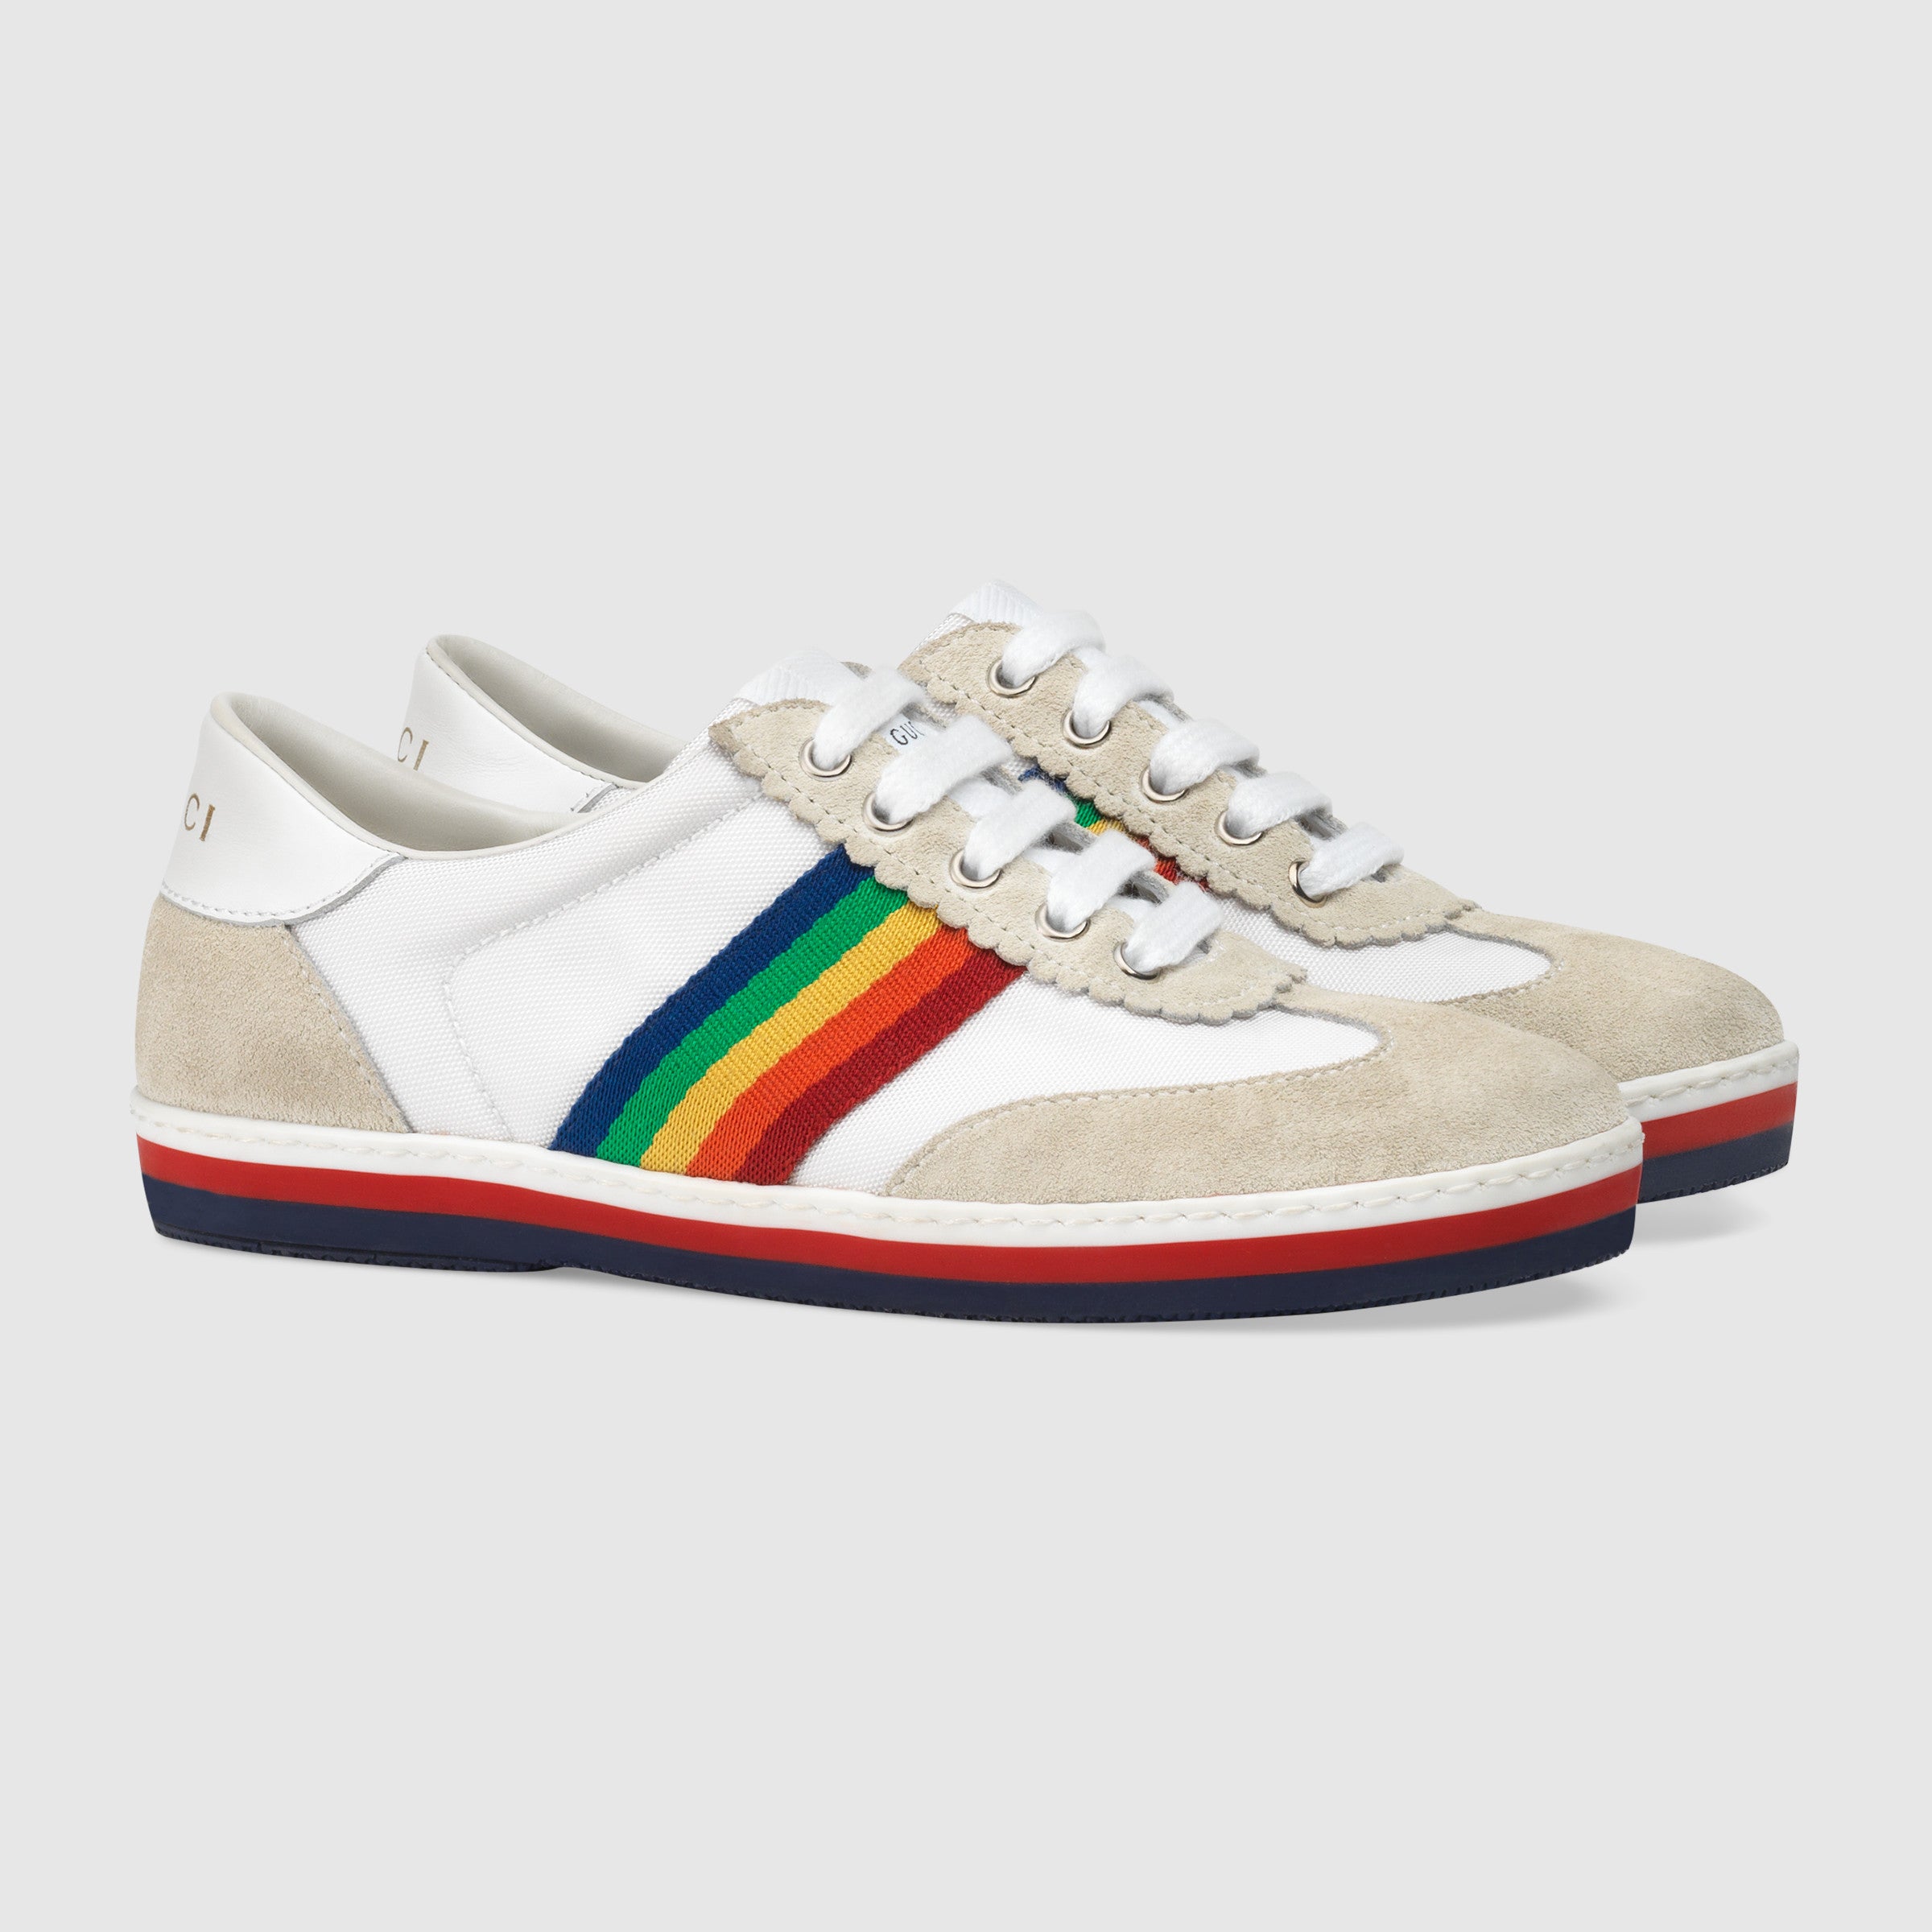 Boys and Girls White & Chromatic Stripes Shoes